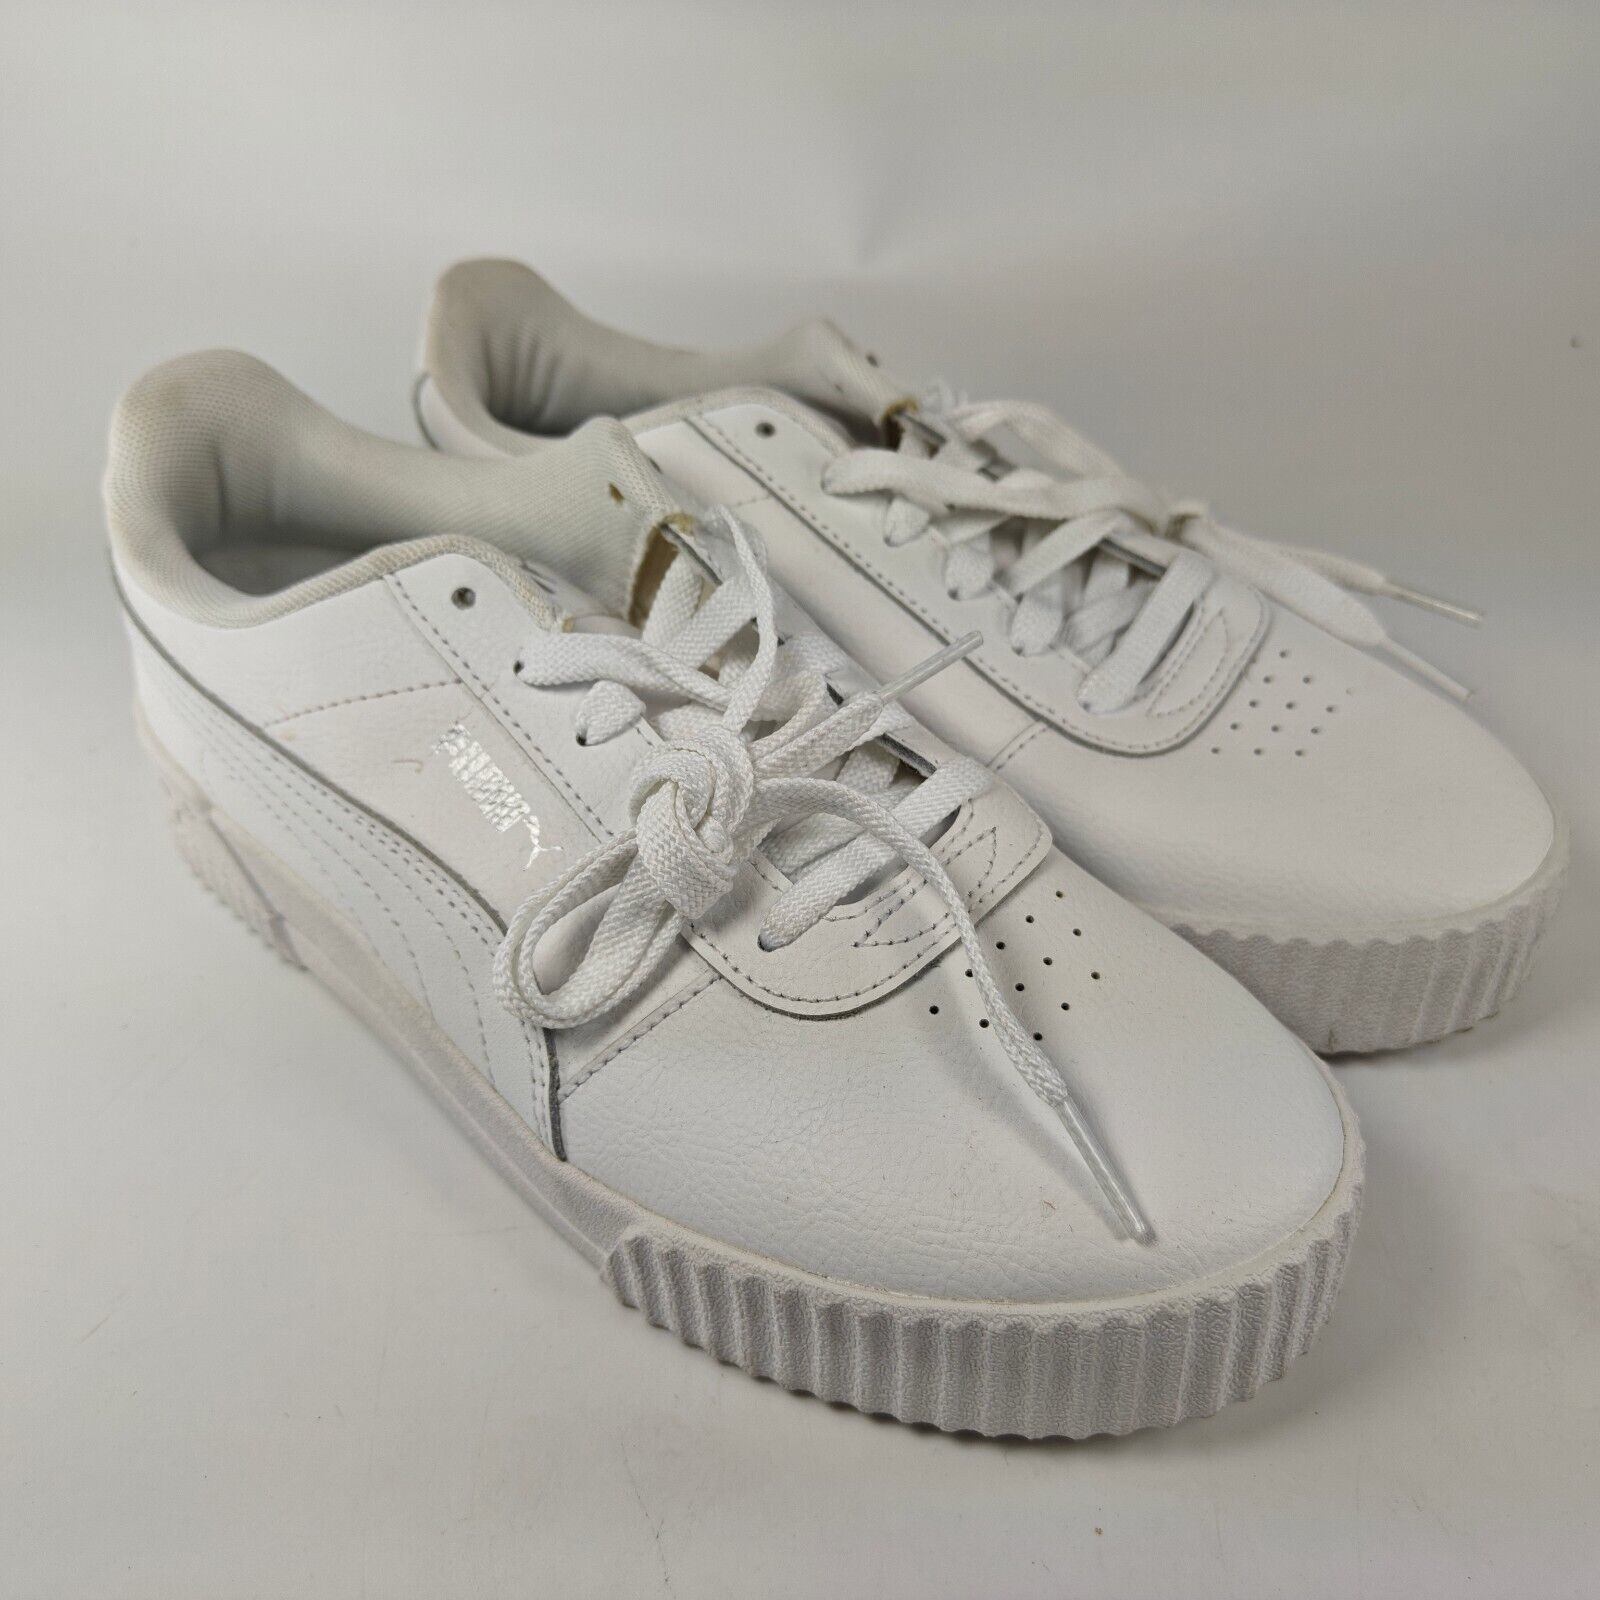 Primary image for PUMA Womens Carina 370325-02 White Leather Casual Low Top Sneaker Size 9